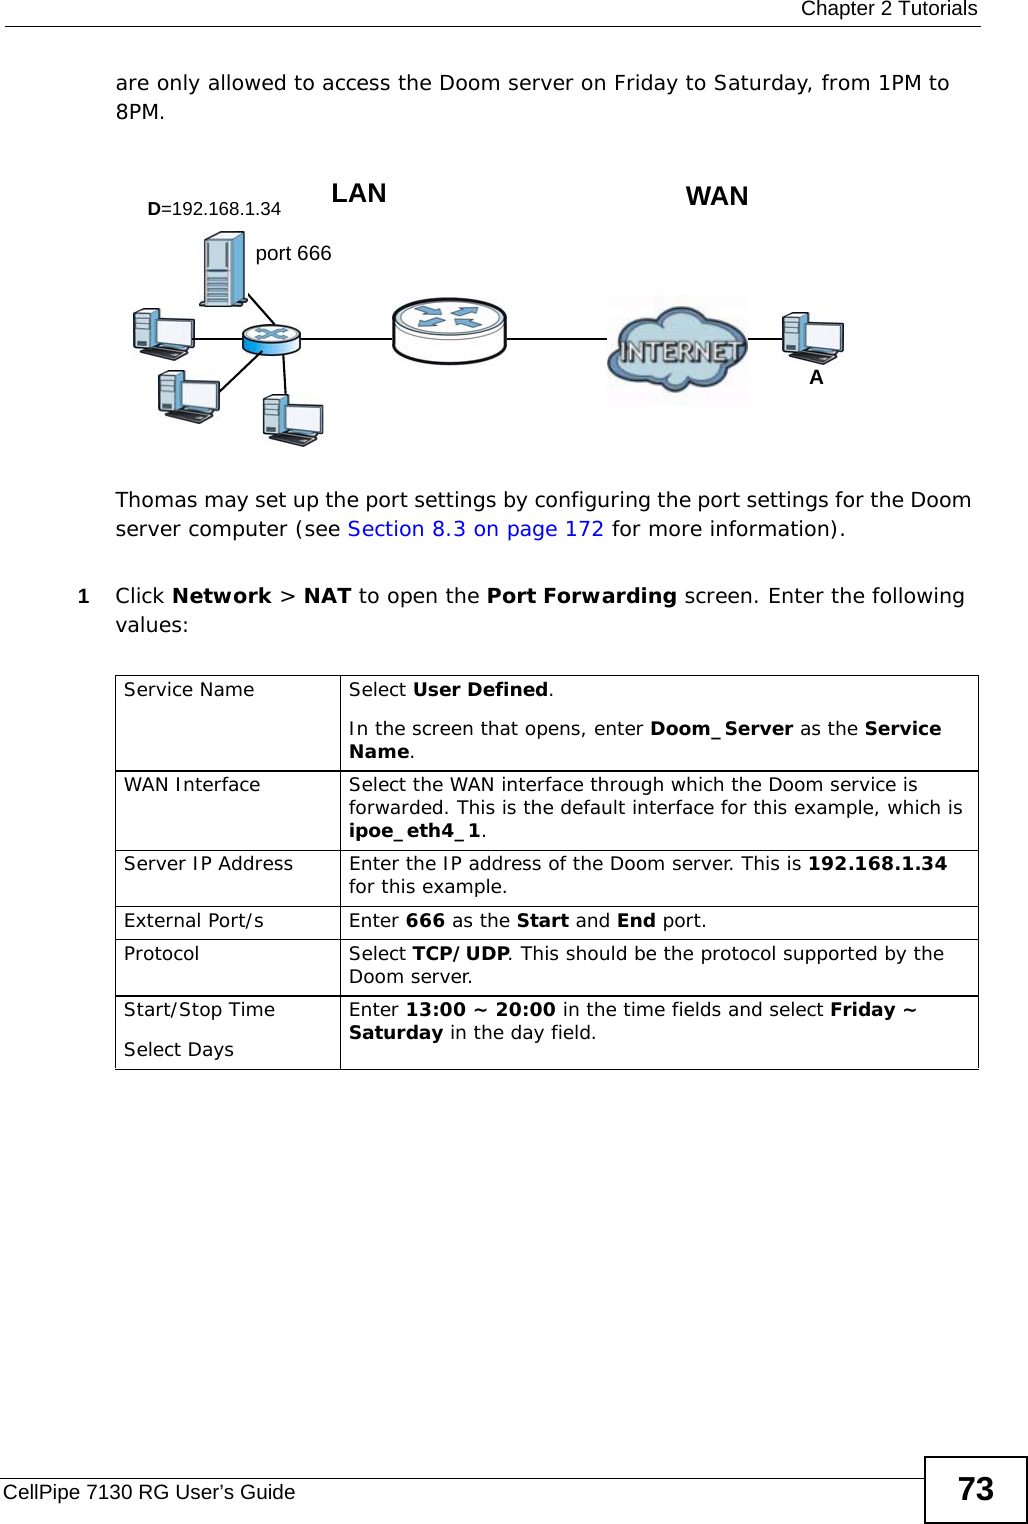  Chapter 2 TutorialsCellPipe 7130 RG User’s Guide 73are only allowed to access the Doom server on Friday to Saturday, from 1PM to 8PM. Tutorial: NAT Port Forwarding Setup Thomas may set up the port settings by configuring the port settings for the Doom server computer (see Section 8.3 on page 172 for more information).1Click Network &gt; NAT to open the Port Forwarding screen. Enter the following values:D=192.168.1.34 WANLANport 666AService Name Select User Defined. In the screen that opens, enter Doom_Server as the Service Name.WAN Interface Select the WAN interface through which the Doom service is forwarded. This is the default interface for this example, which is ipoe_eth4_1.Server IP Address Enter the IP address of the Doom server. This is 192.168.1.34 for this example.External Port/s Enter 666 as the Start and End port.Protocol Select TCP/UDP. This should be the protocol supported by the Doom server.Start/Stop TimeSelect DaysEnter 13:00 ~ 20:00 in the time fields and select Friday ~ Saturday in the day field.